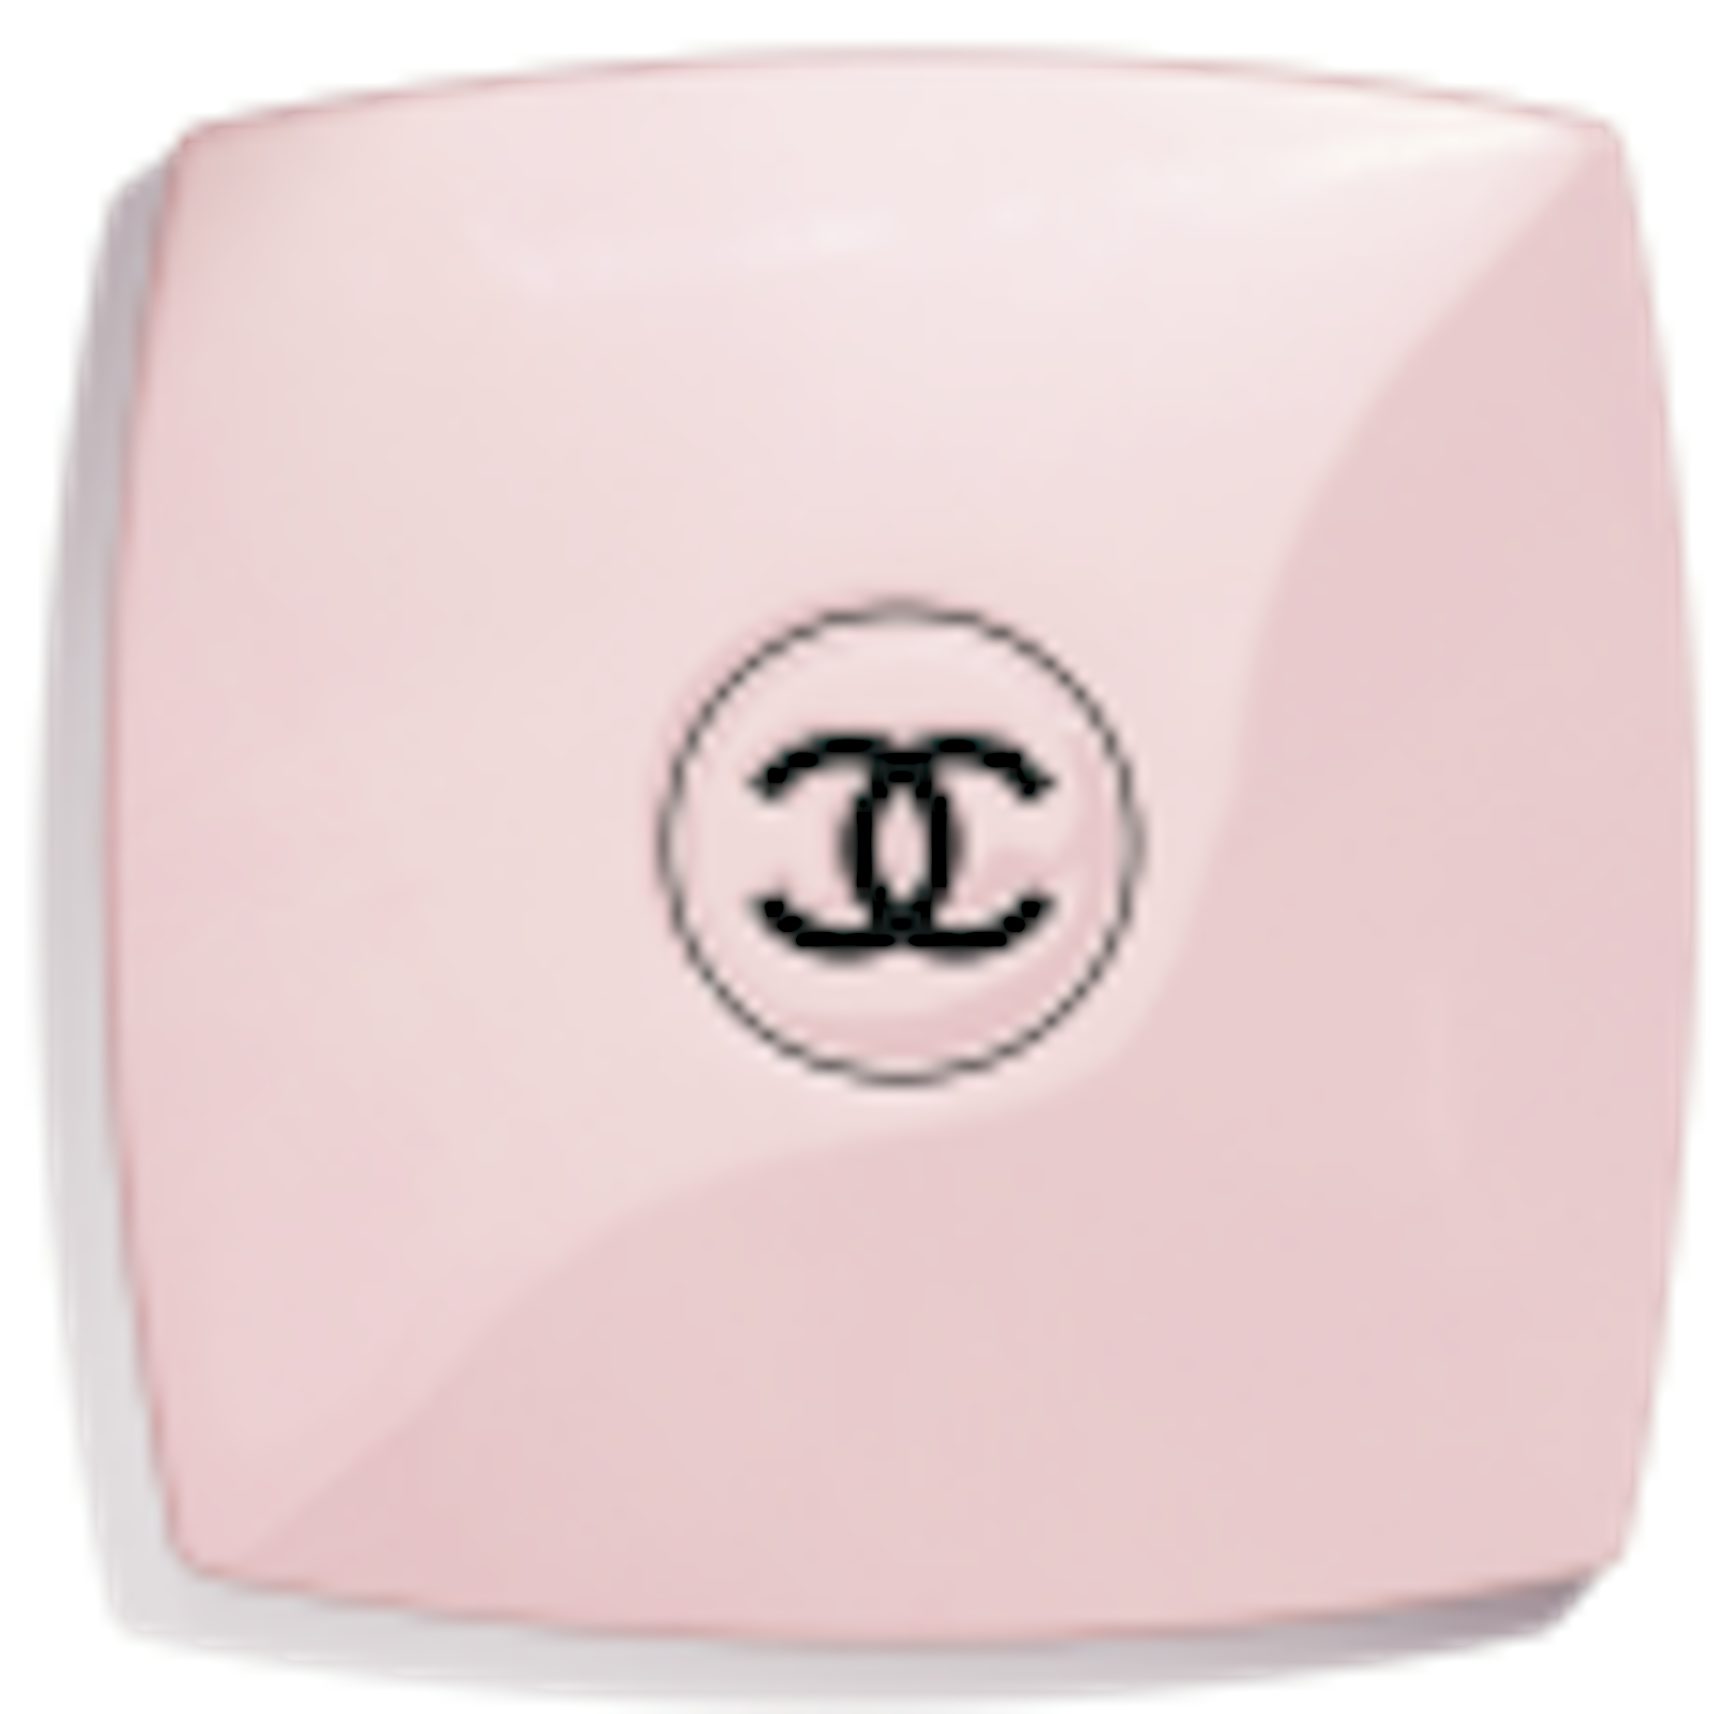 Chanel Codes Couleur Limited-Edition Mirror Duo 111 - BALLERINA in Glass -  GB